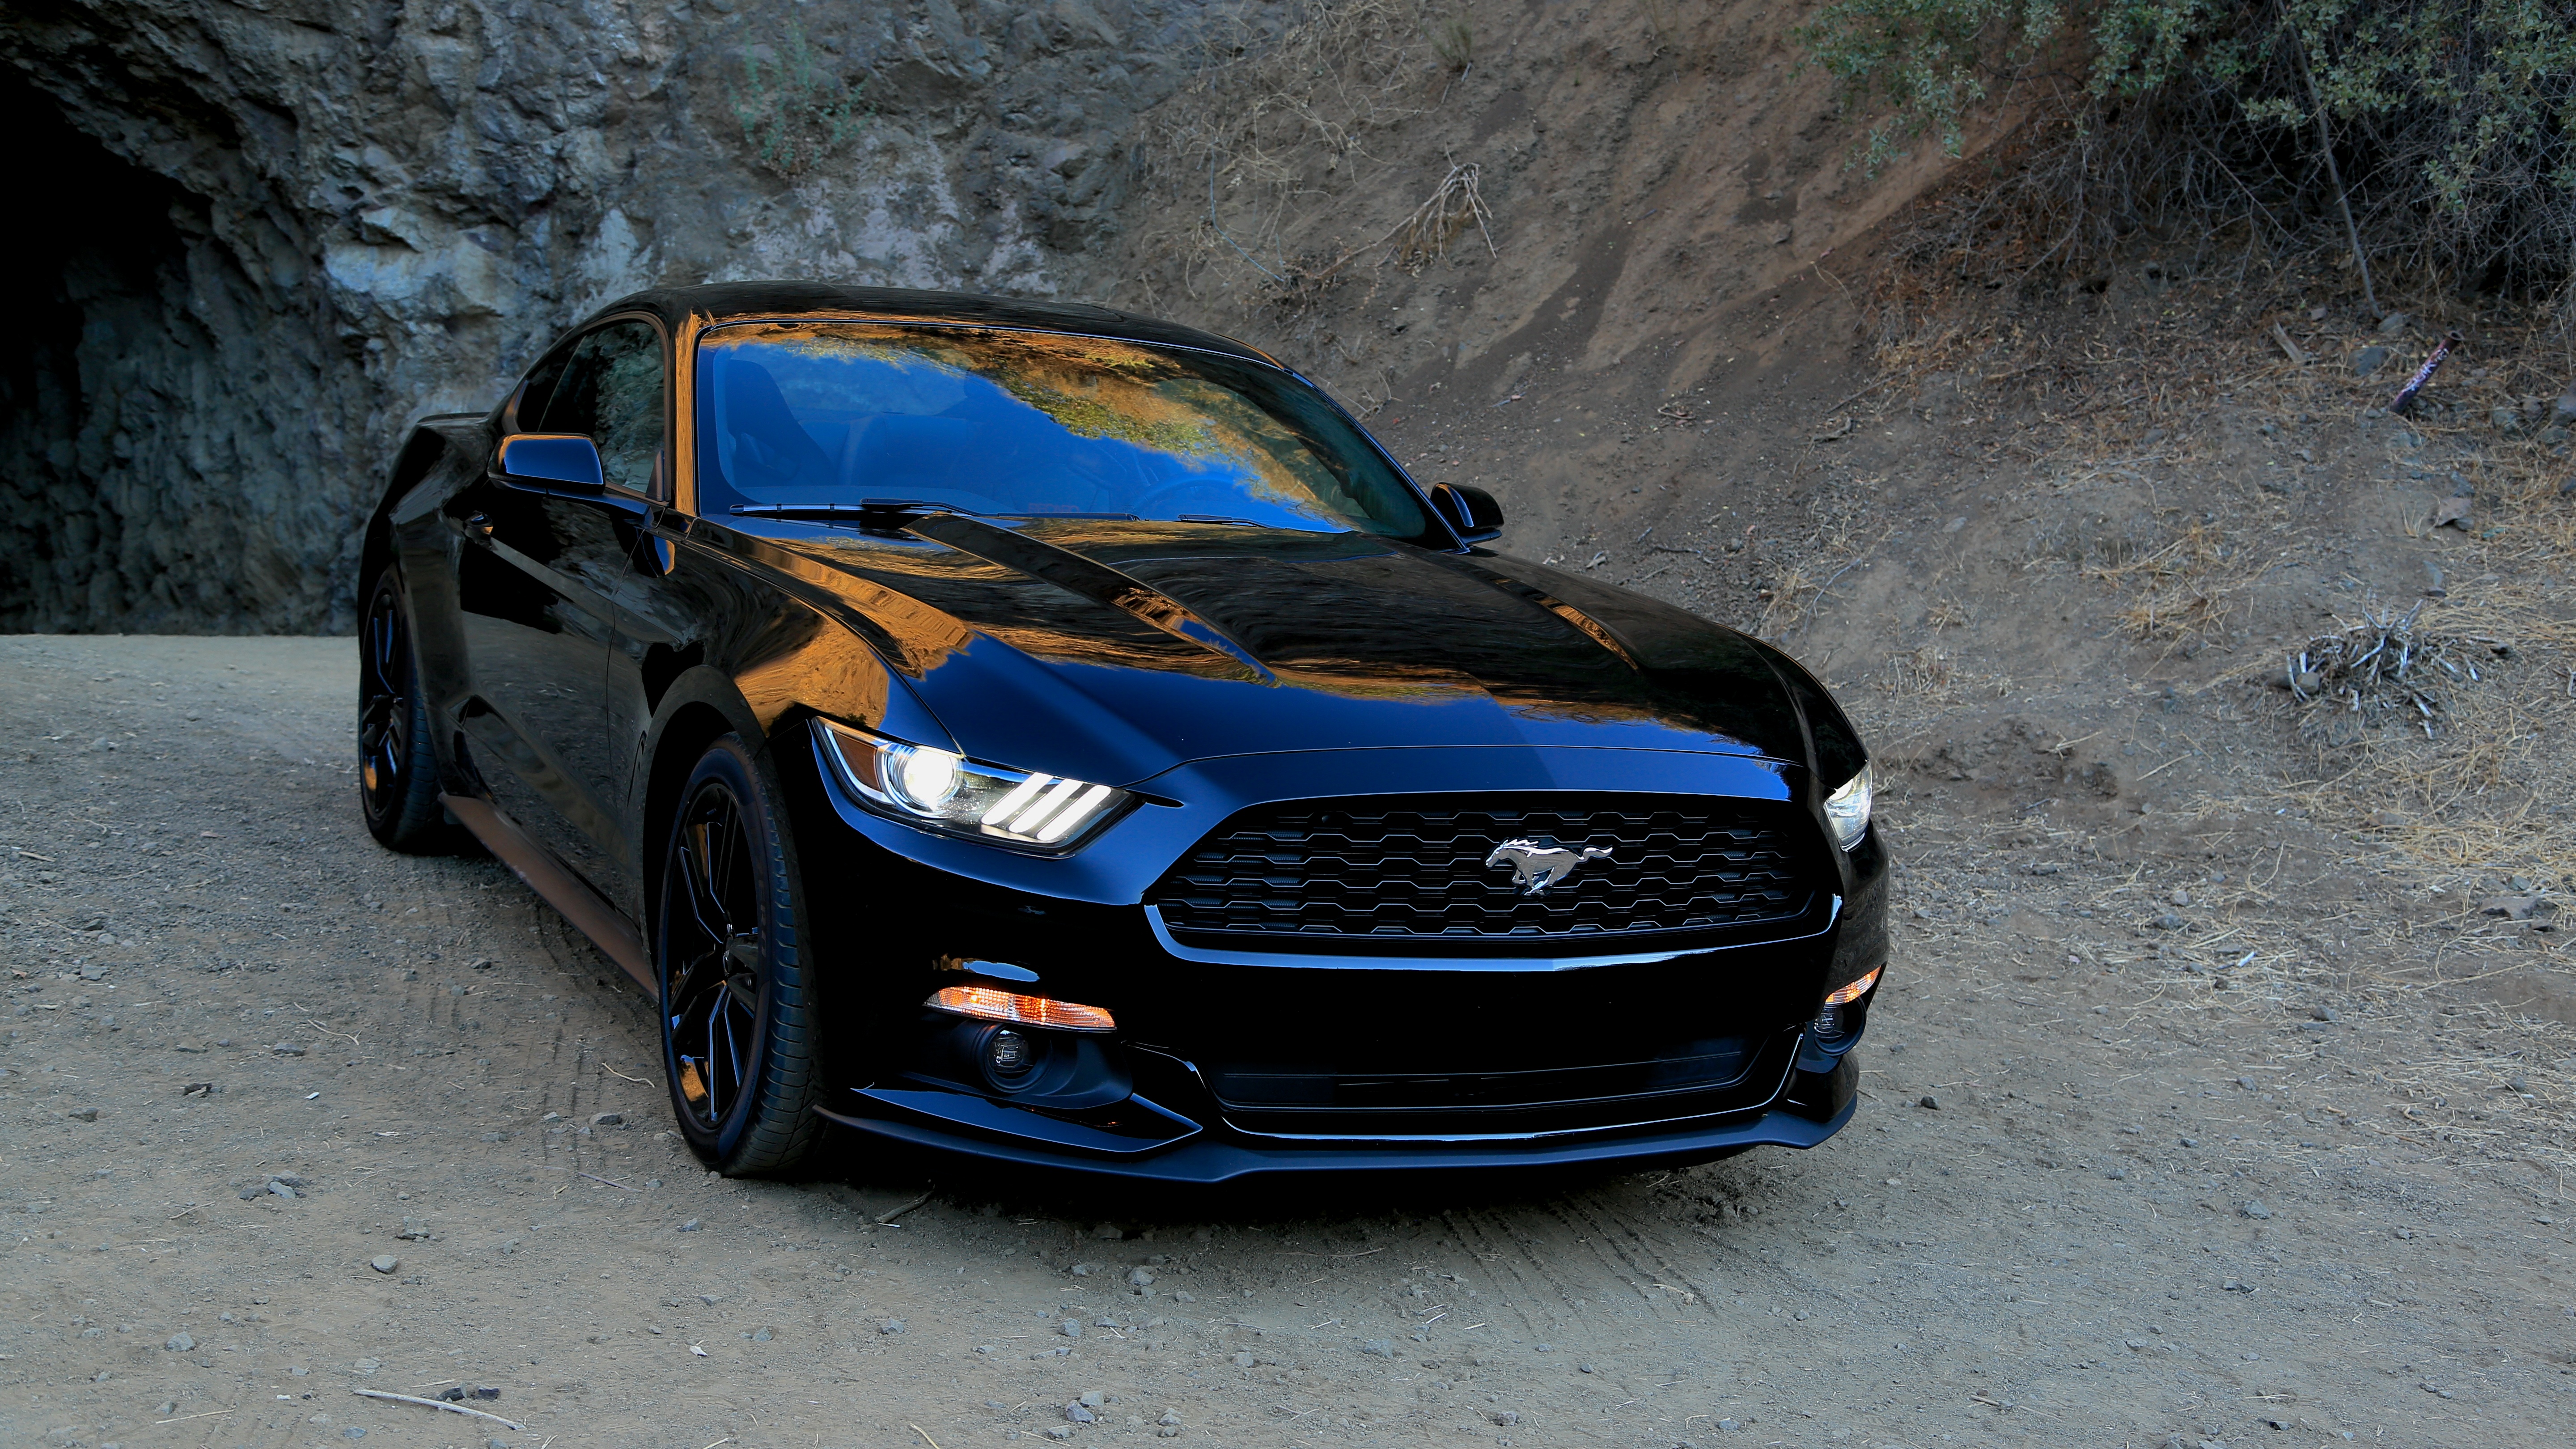 Detail Images Of Mustangs Cars Nomer 21